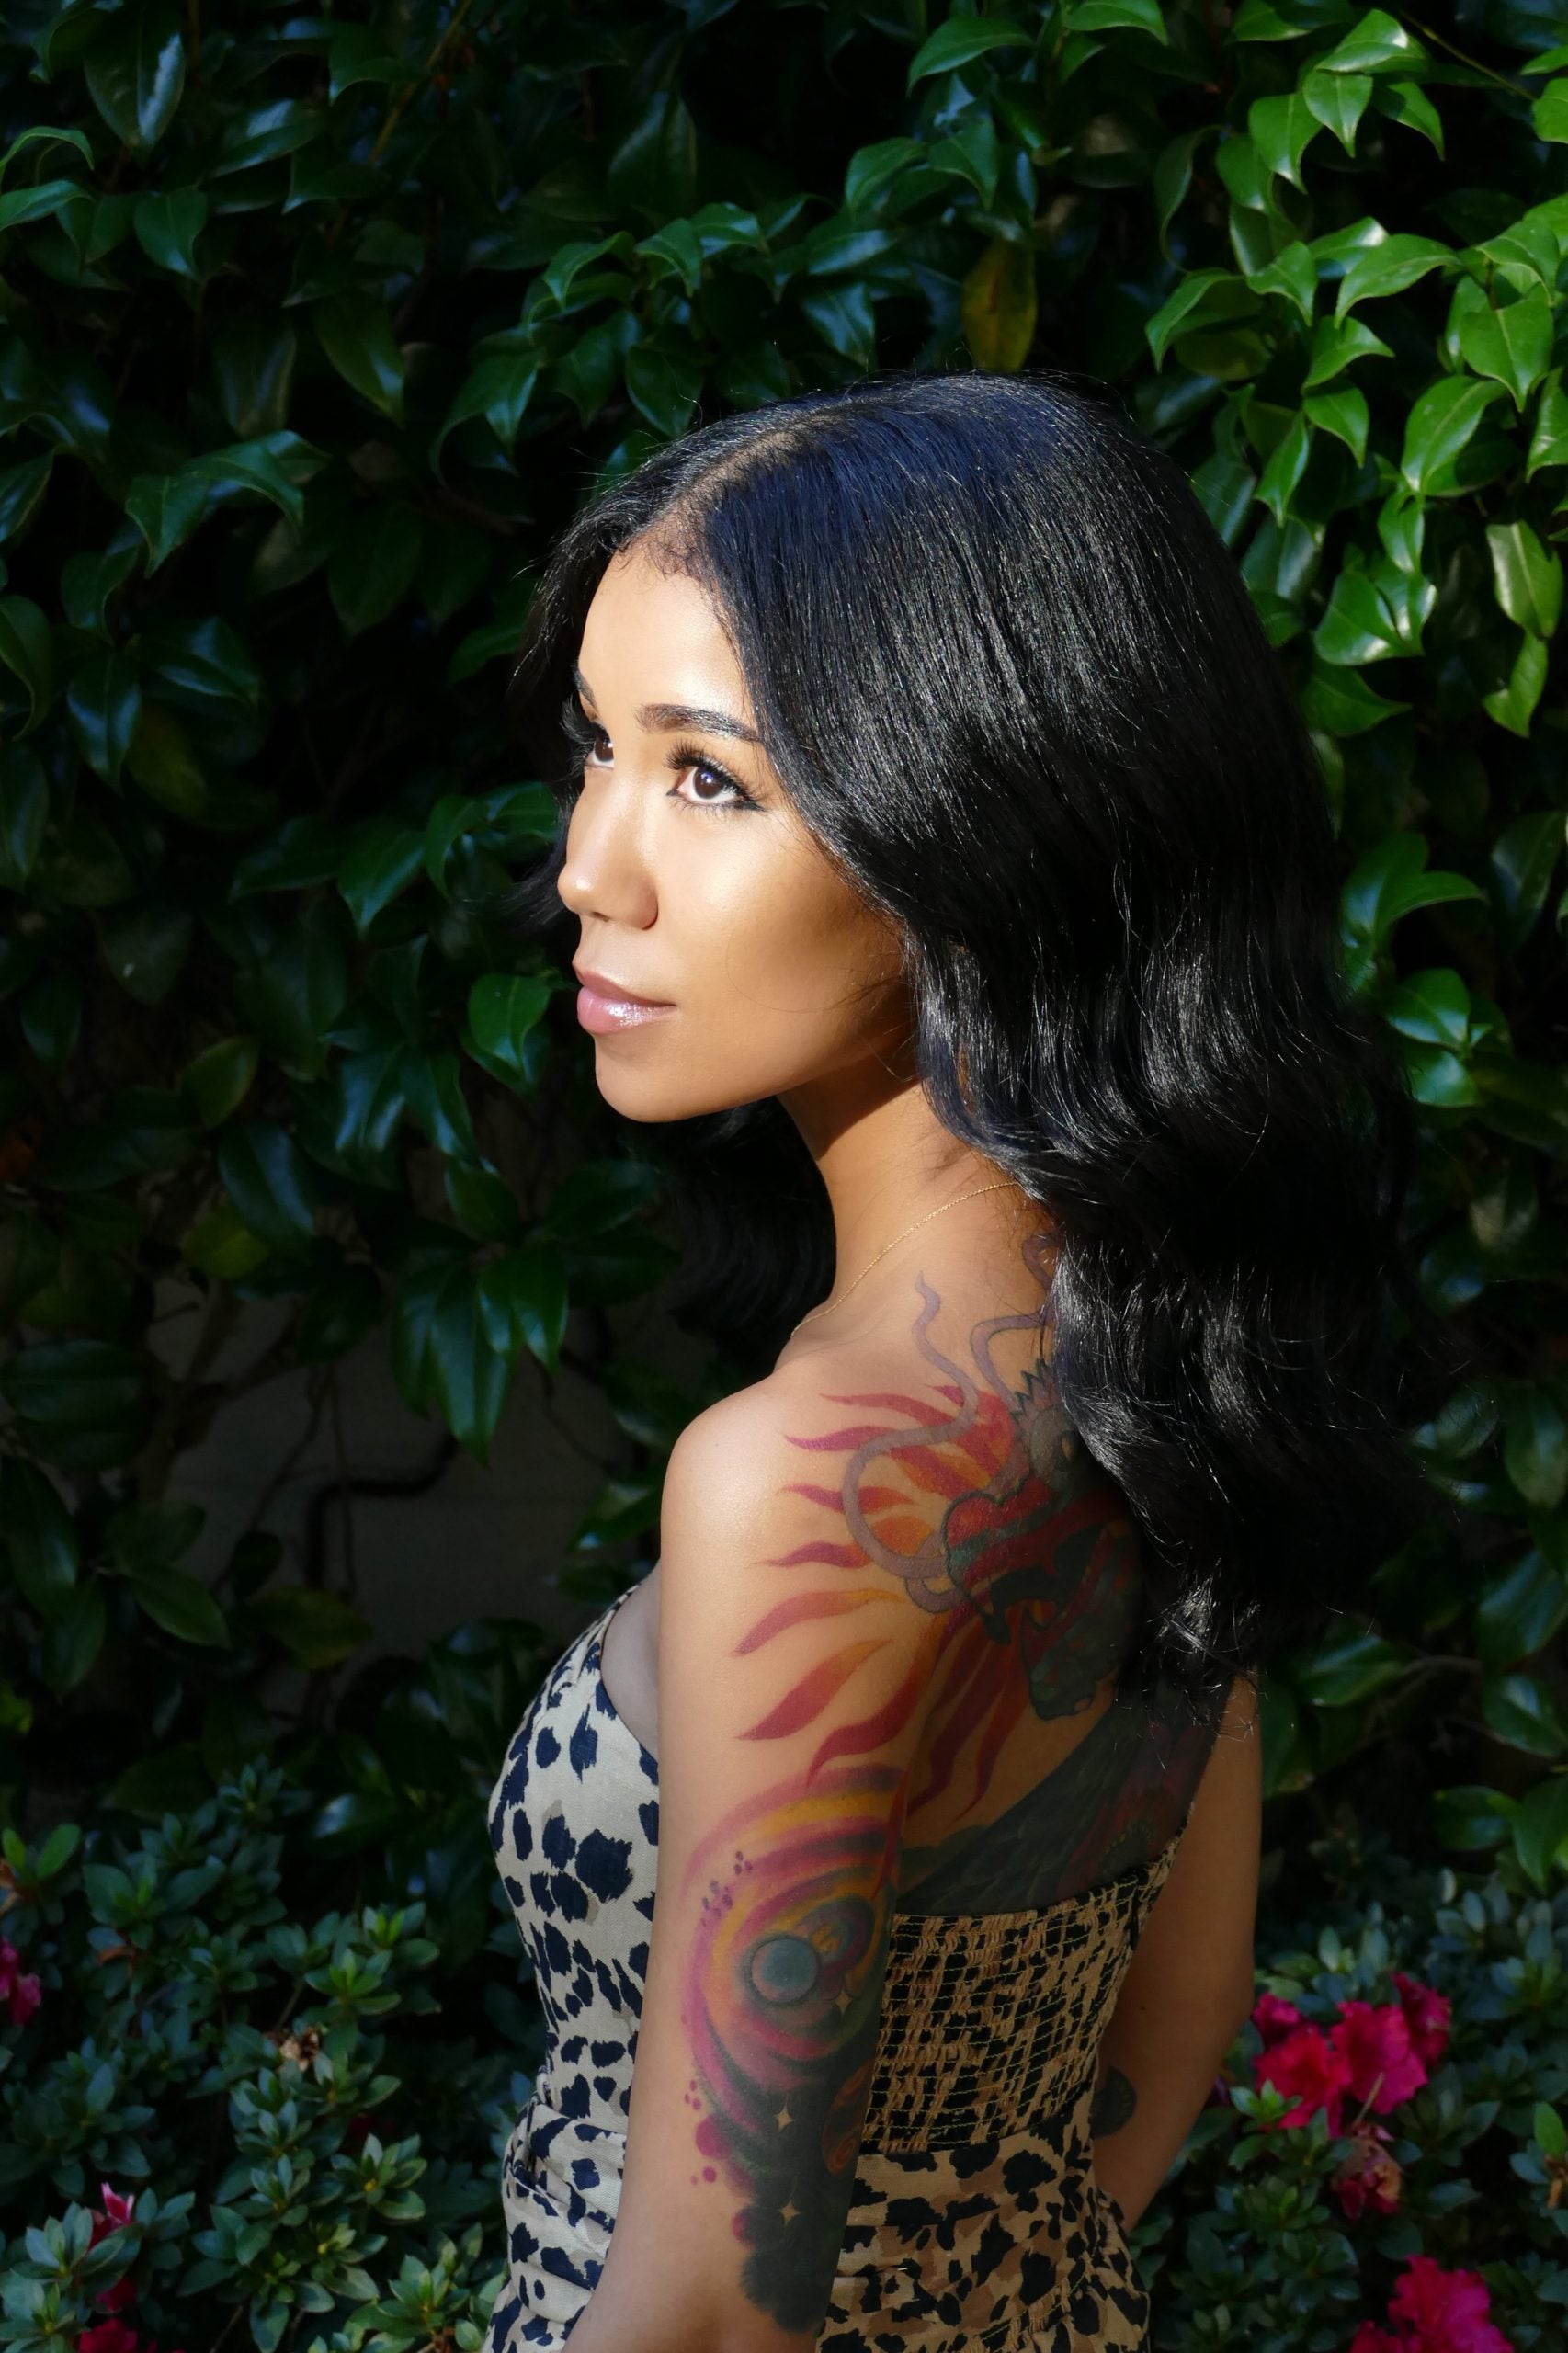 Jhené Aiko Talks New Album And True Inspiration Behind Alleged Diss Track ’Triggered’